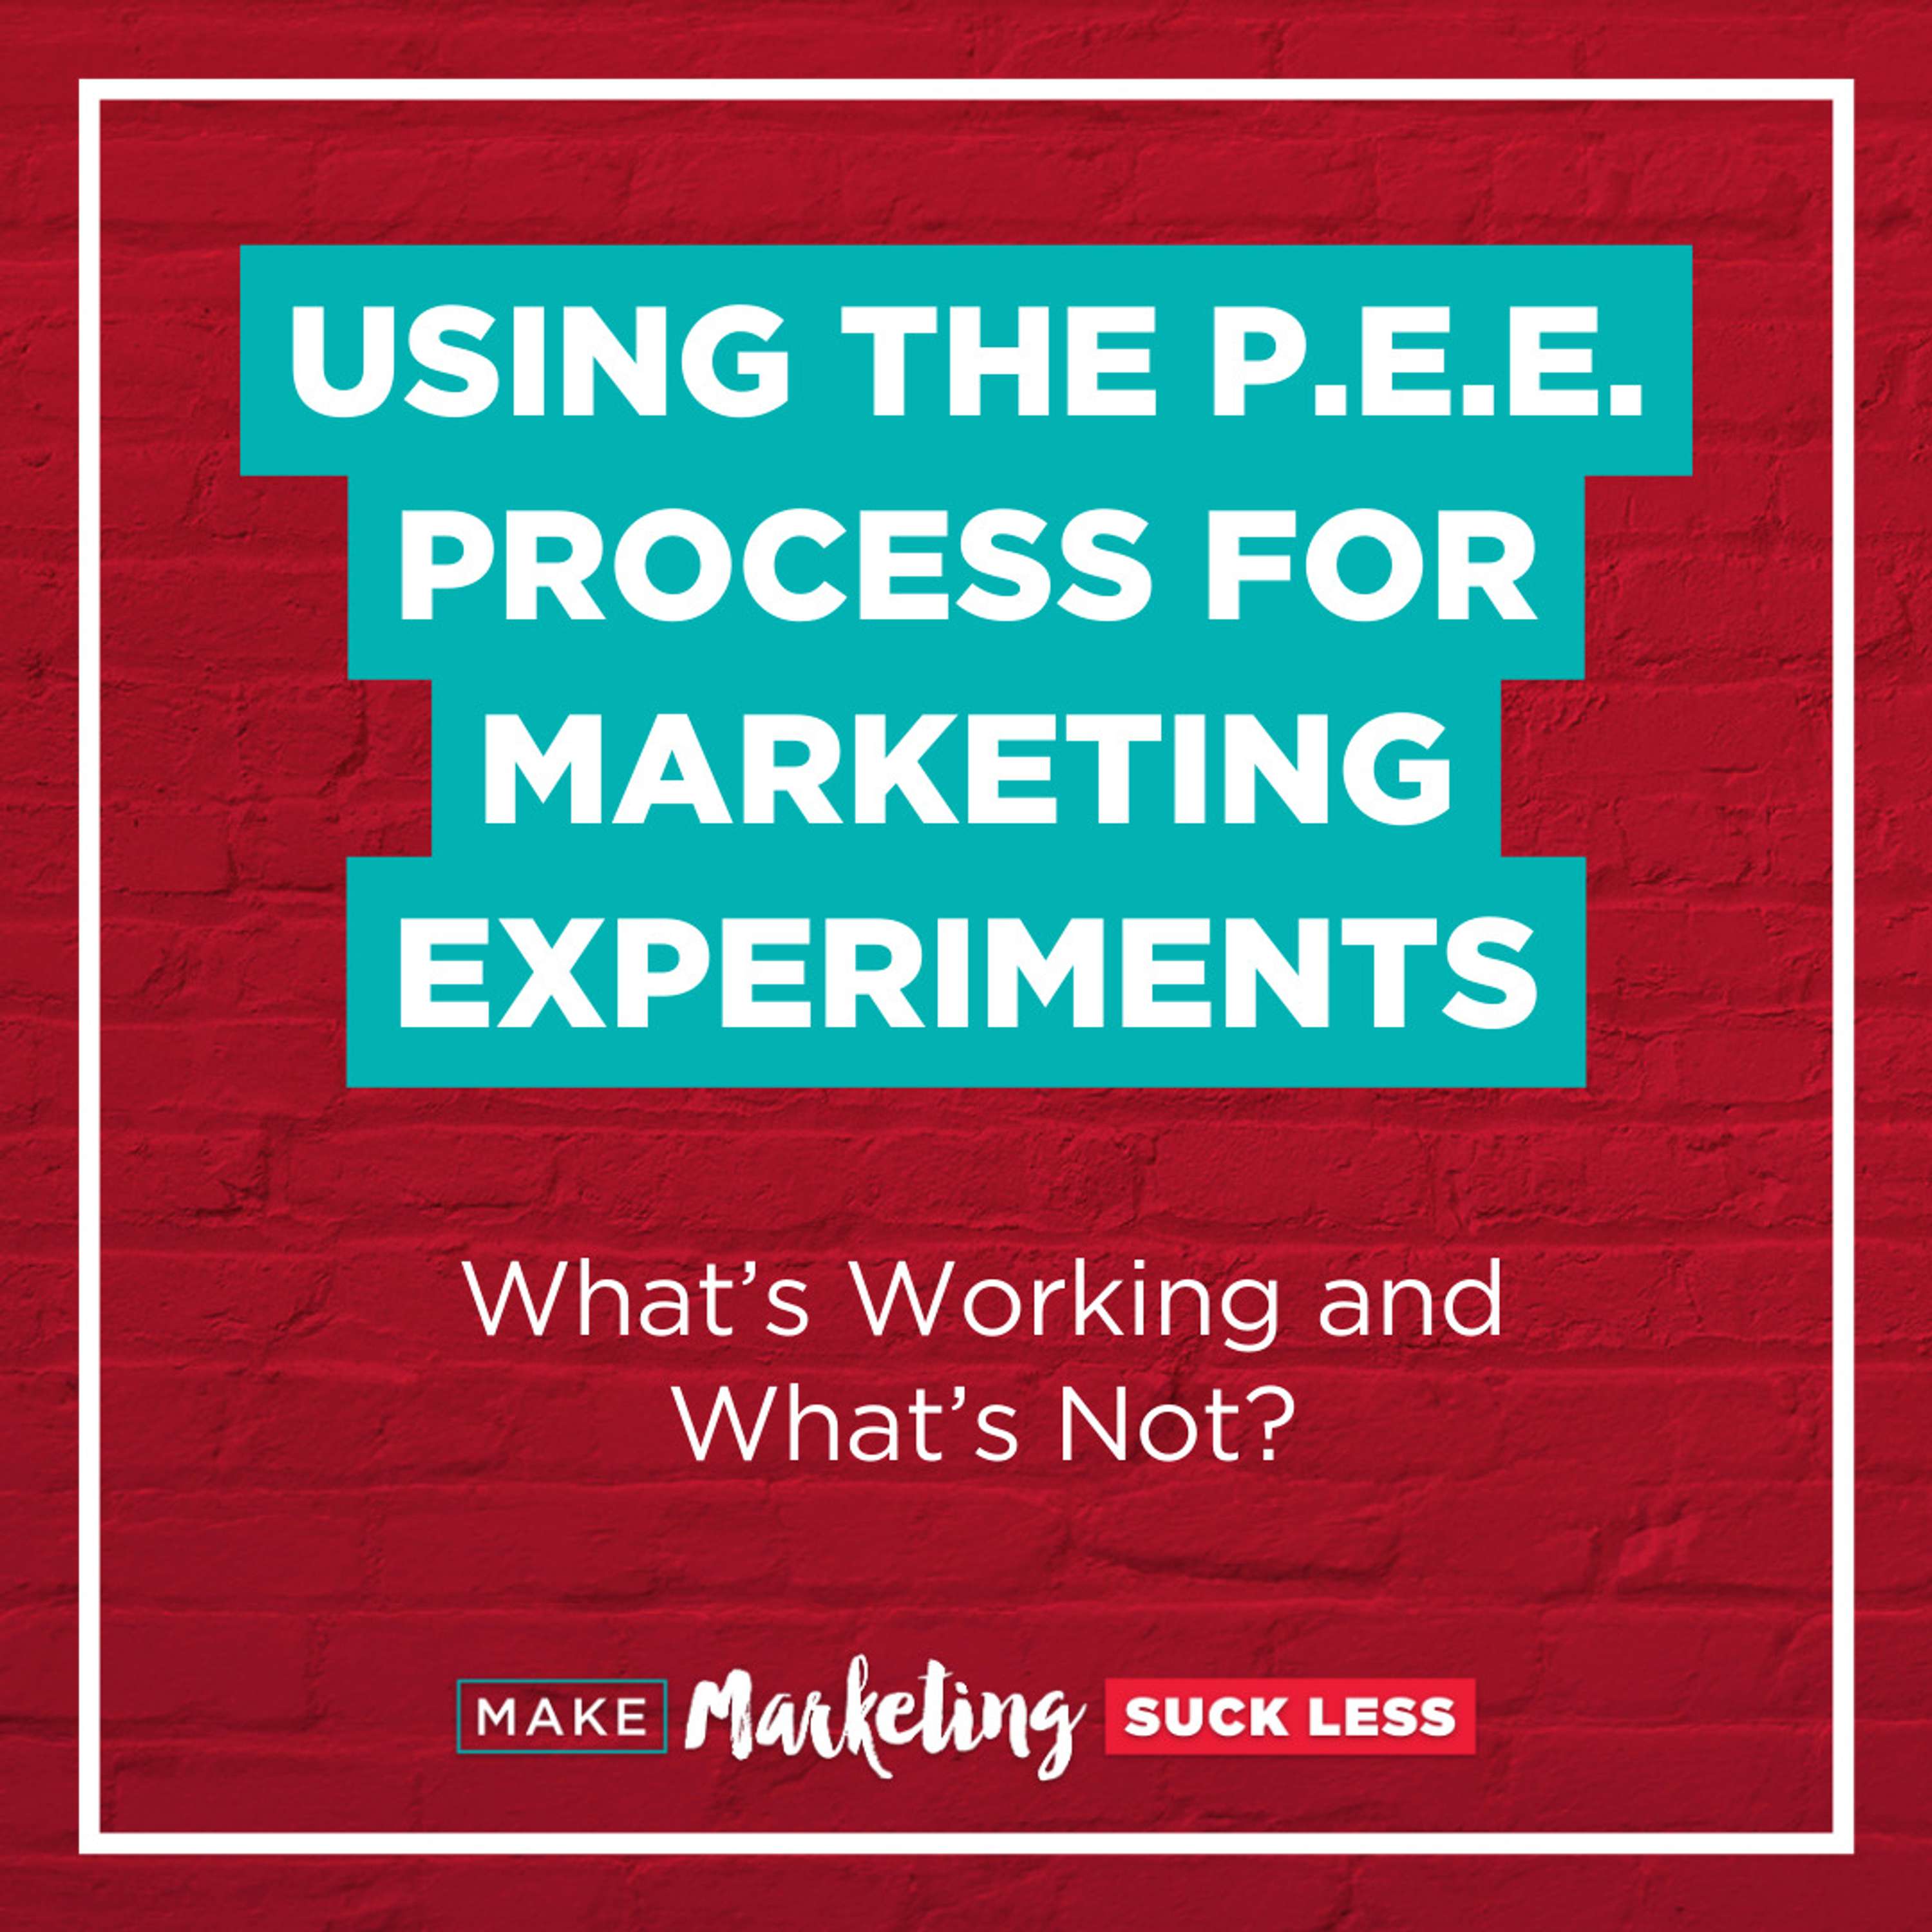 Using the P.E.E. Process for Marketing Experiments: What’s Working and What’s Not?